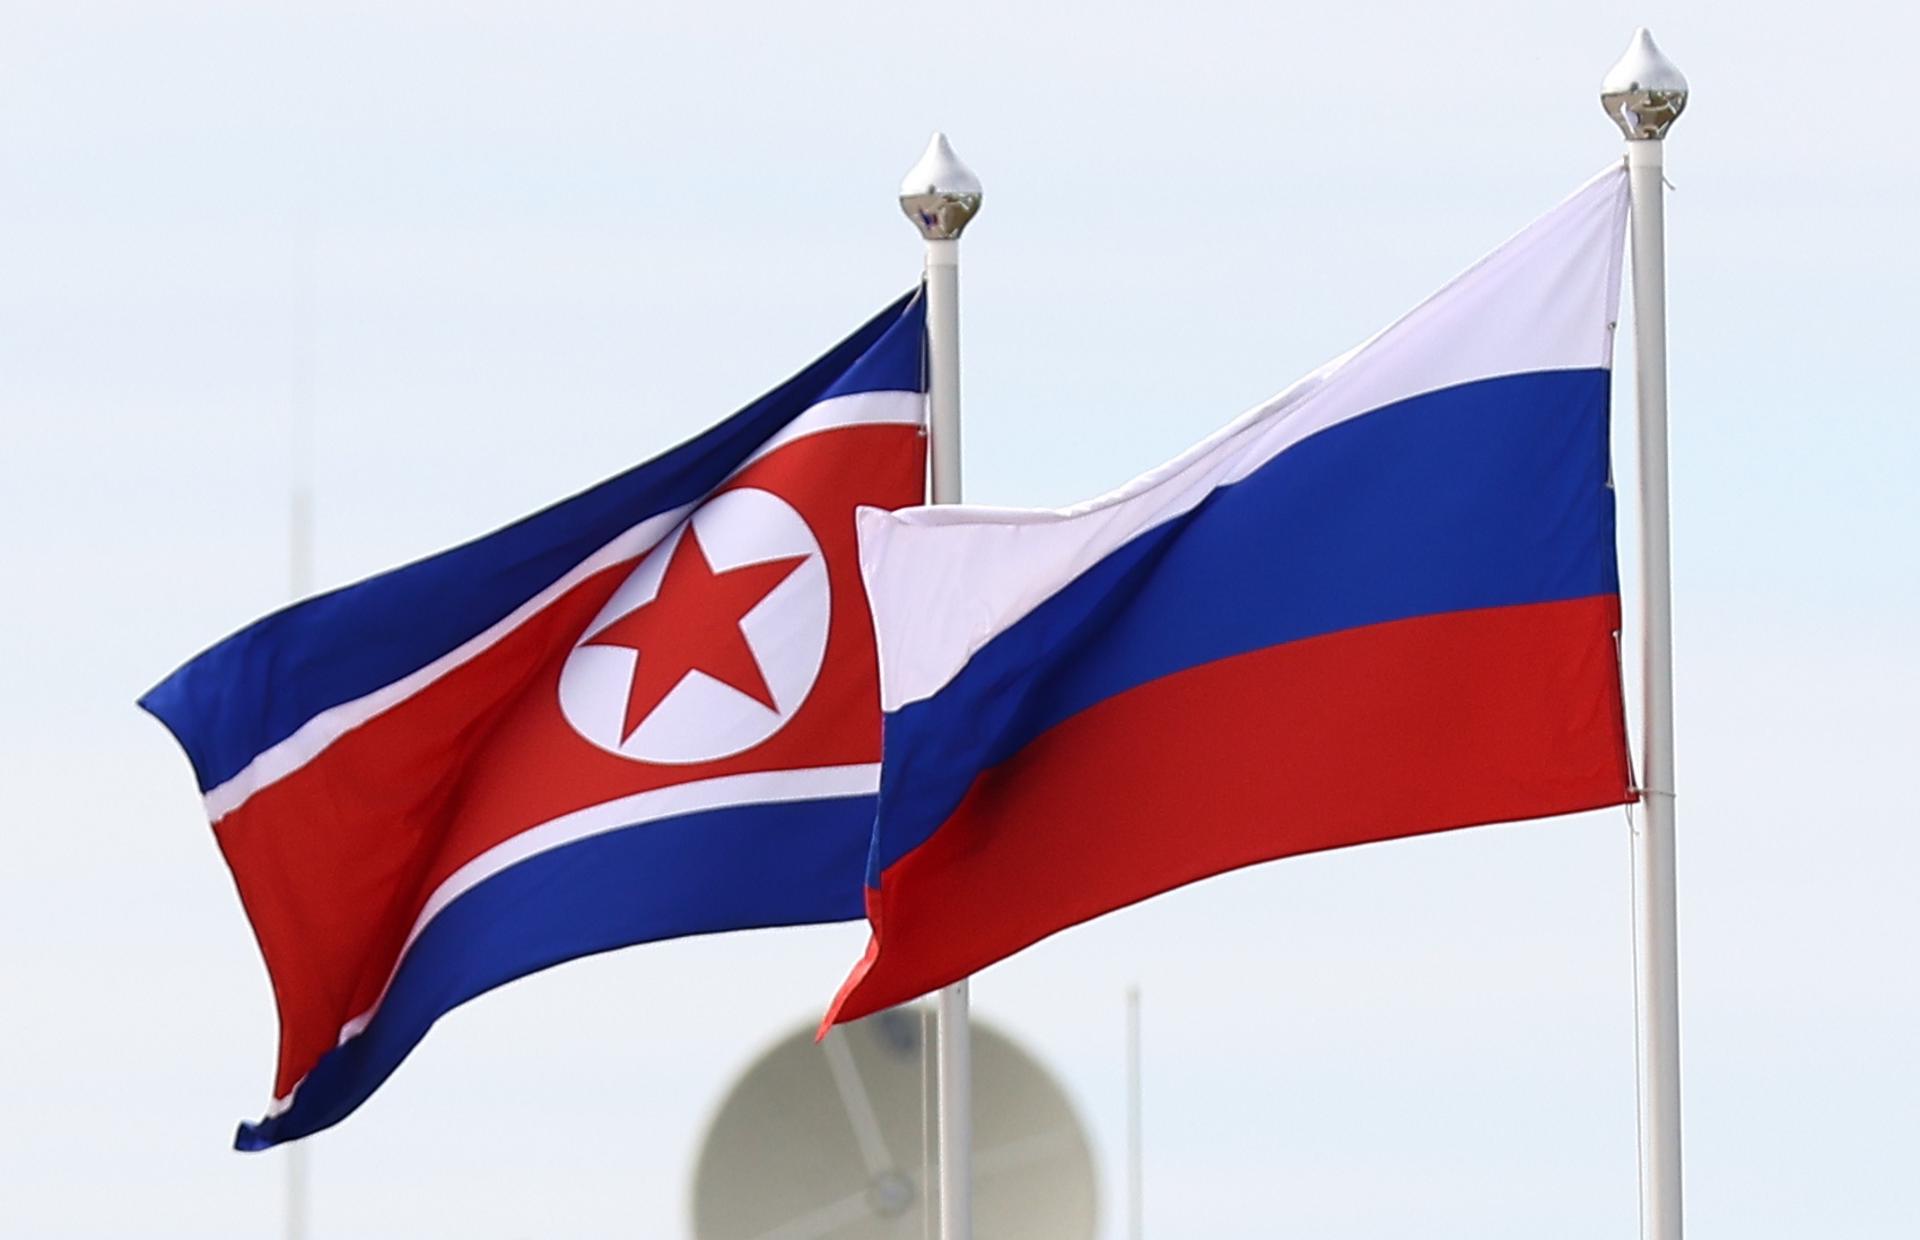 Flags of North Korea (L) and Russia fly during a visit of Russian President Putin and North Korean leader Kim Jong Un to the Vostochny cosmodrome, outside the town of Tsiolkovsky (former Uglegorsk), some 180km north of Blagoveschensk in Amur region, Russia, 13 September 2023. EFE-EPA/ARTEM GEODAKYAN/SPUTNIK/KREMLIN / POOL MANDATORY CREDIT/FILE